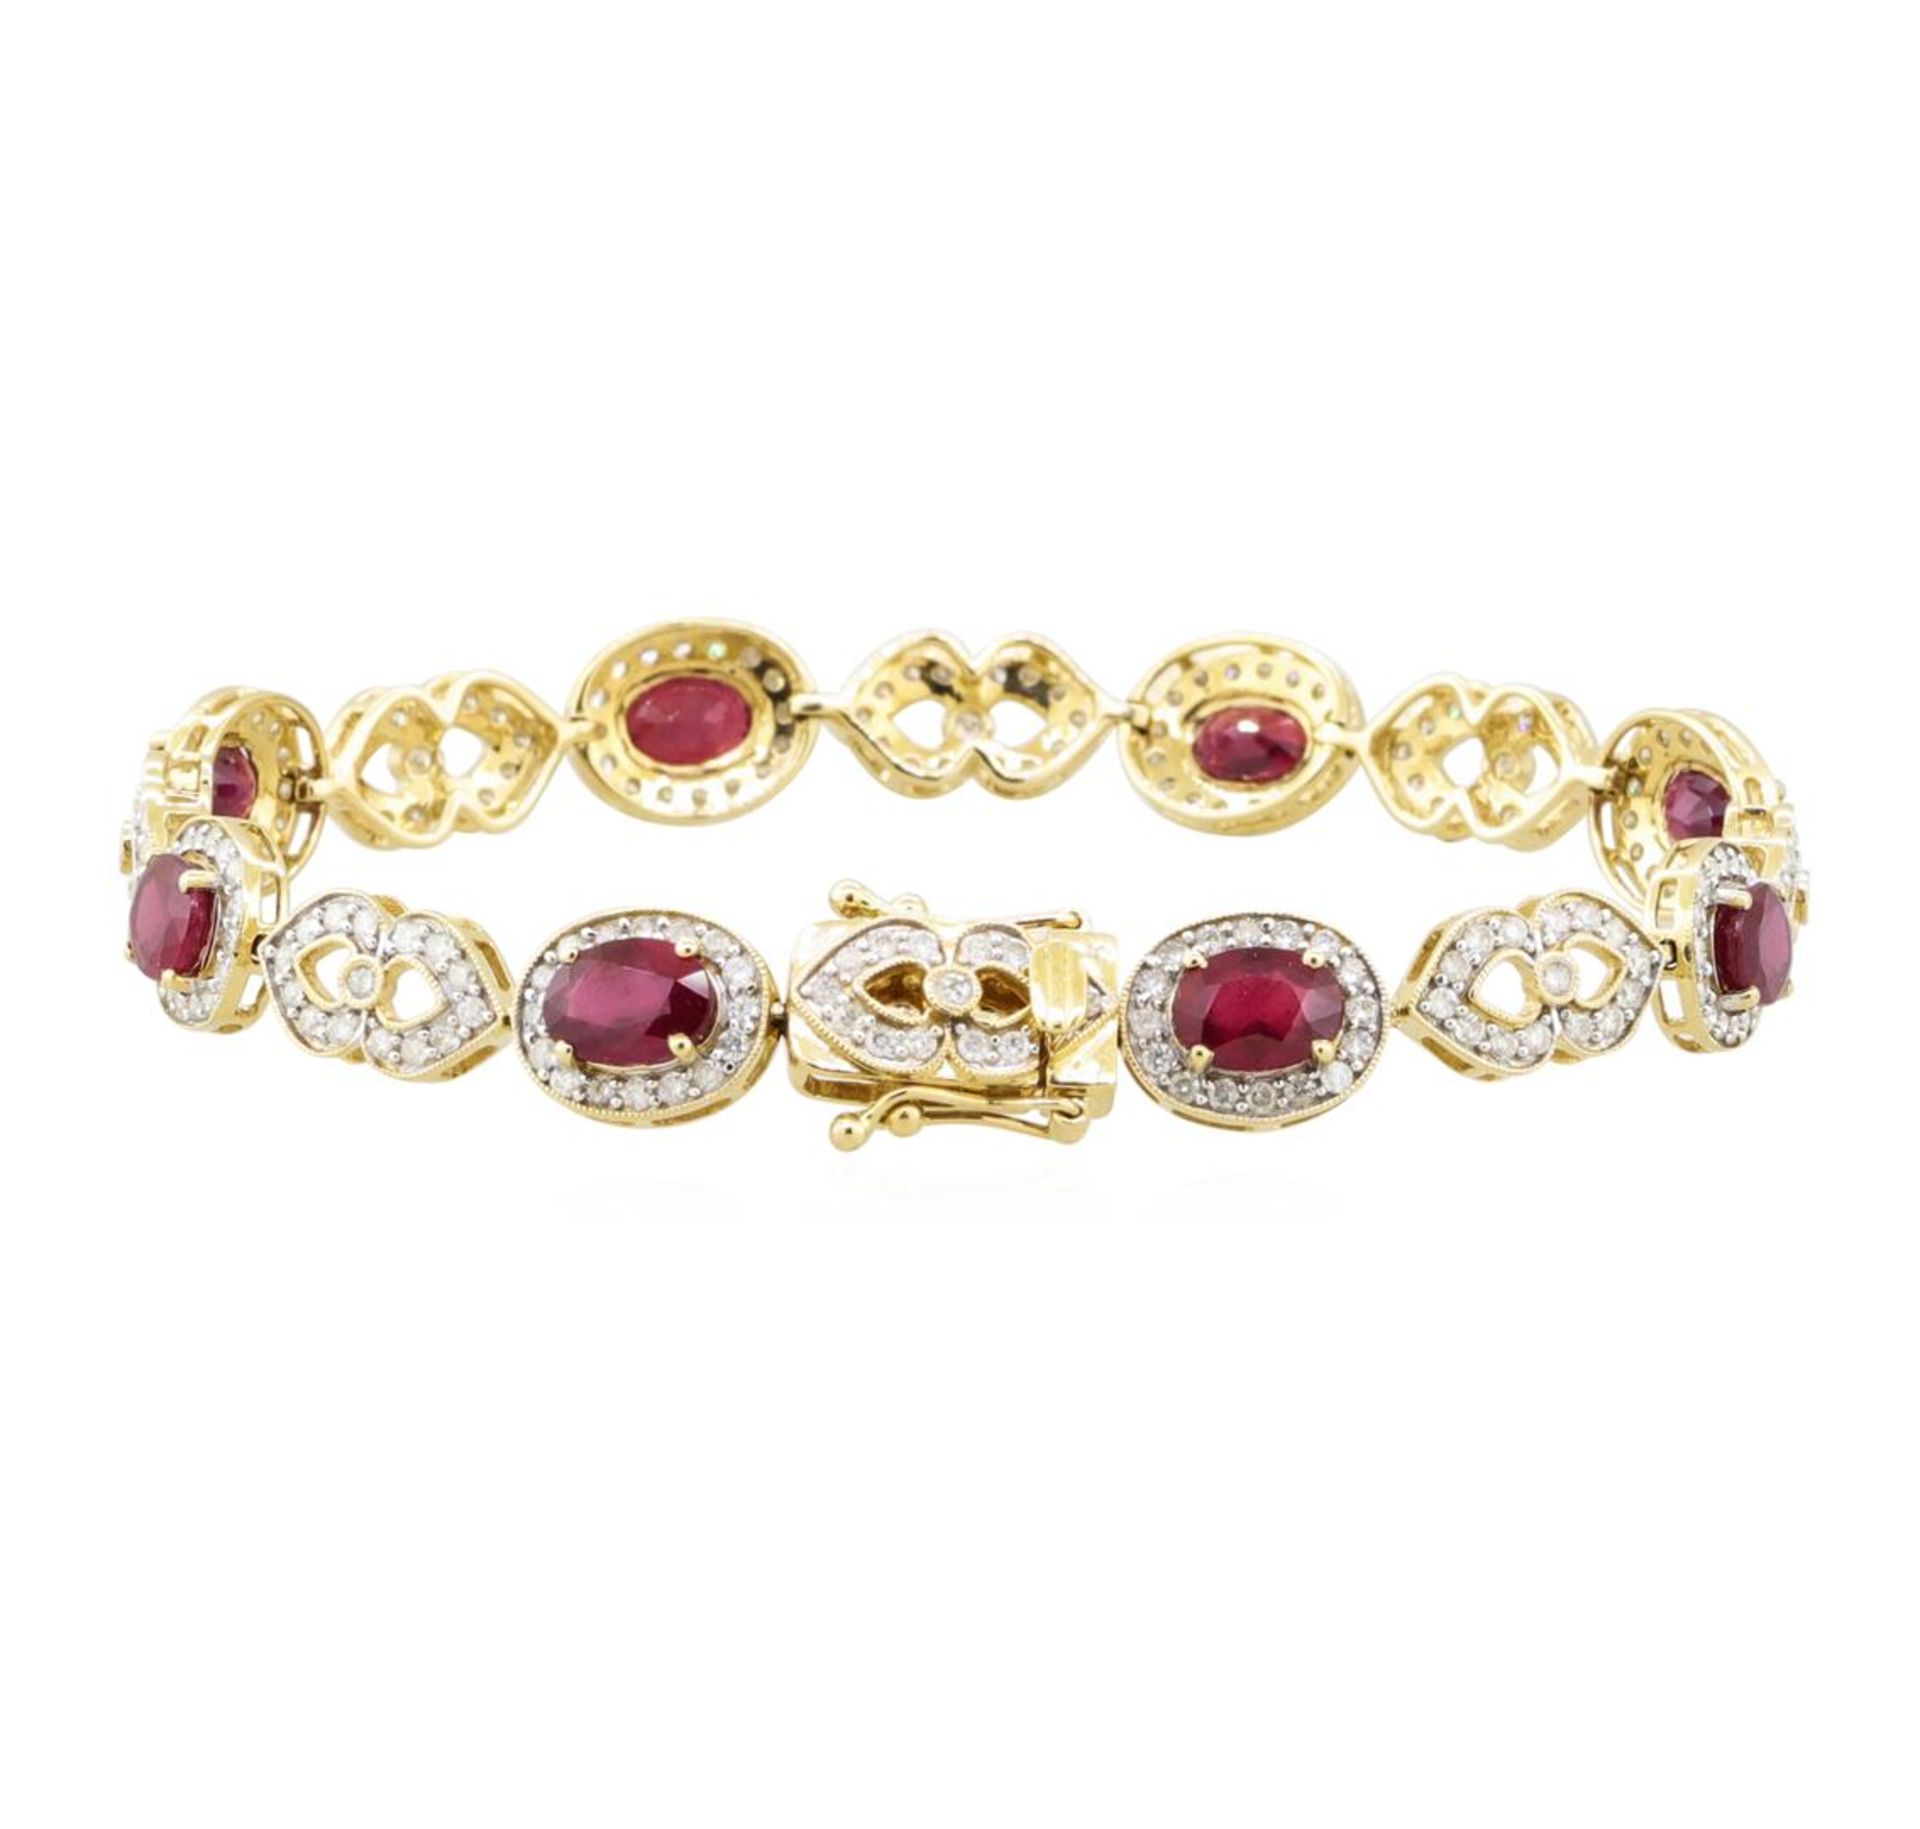 9.32ctw Ruby and Diamond Bracelet - 14KT Yellow Gold - Image 3 of 3